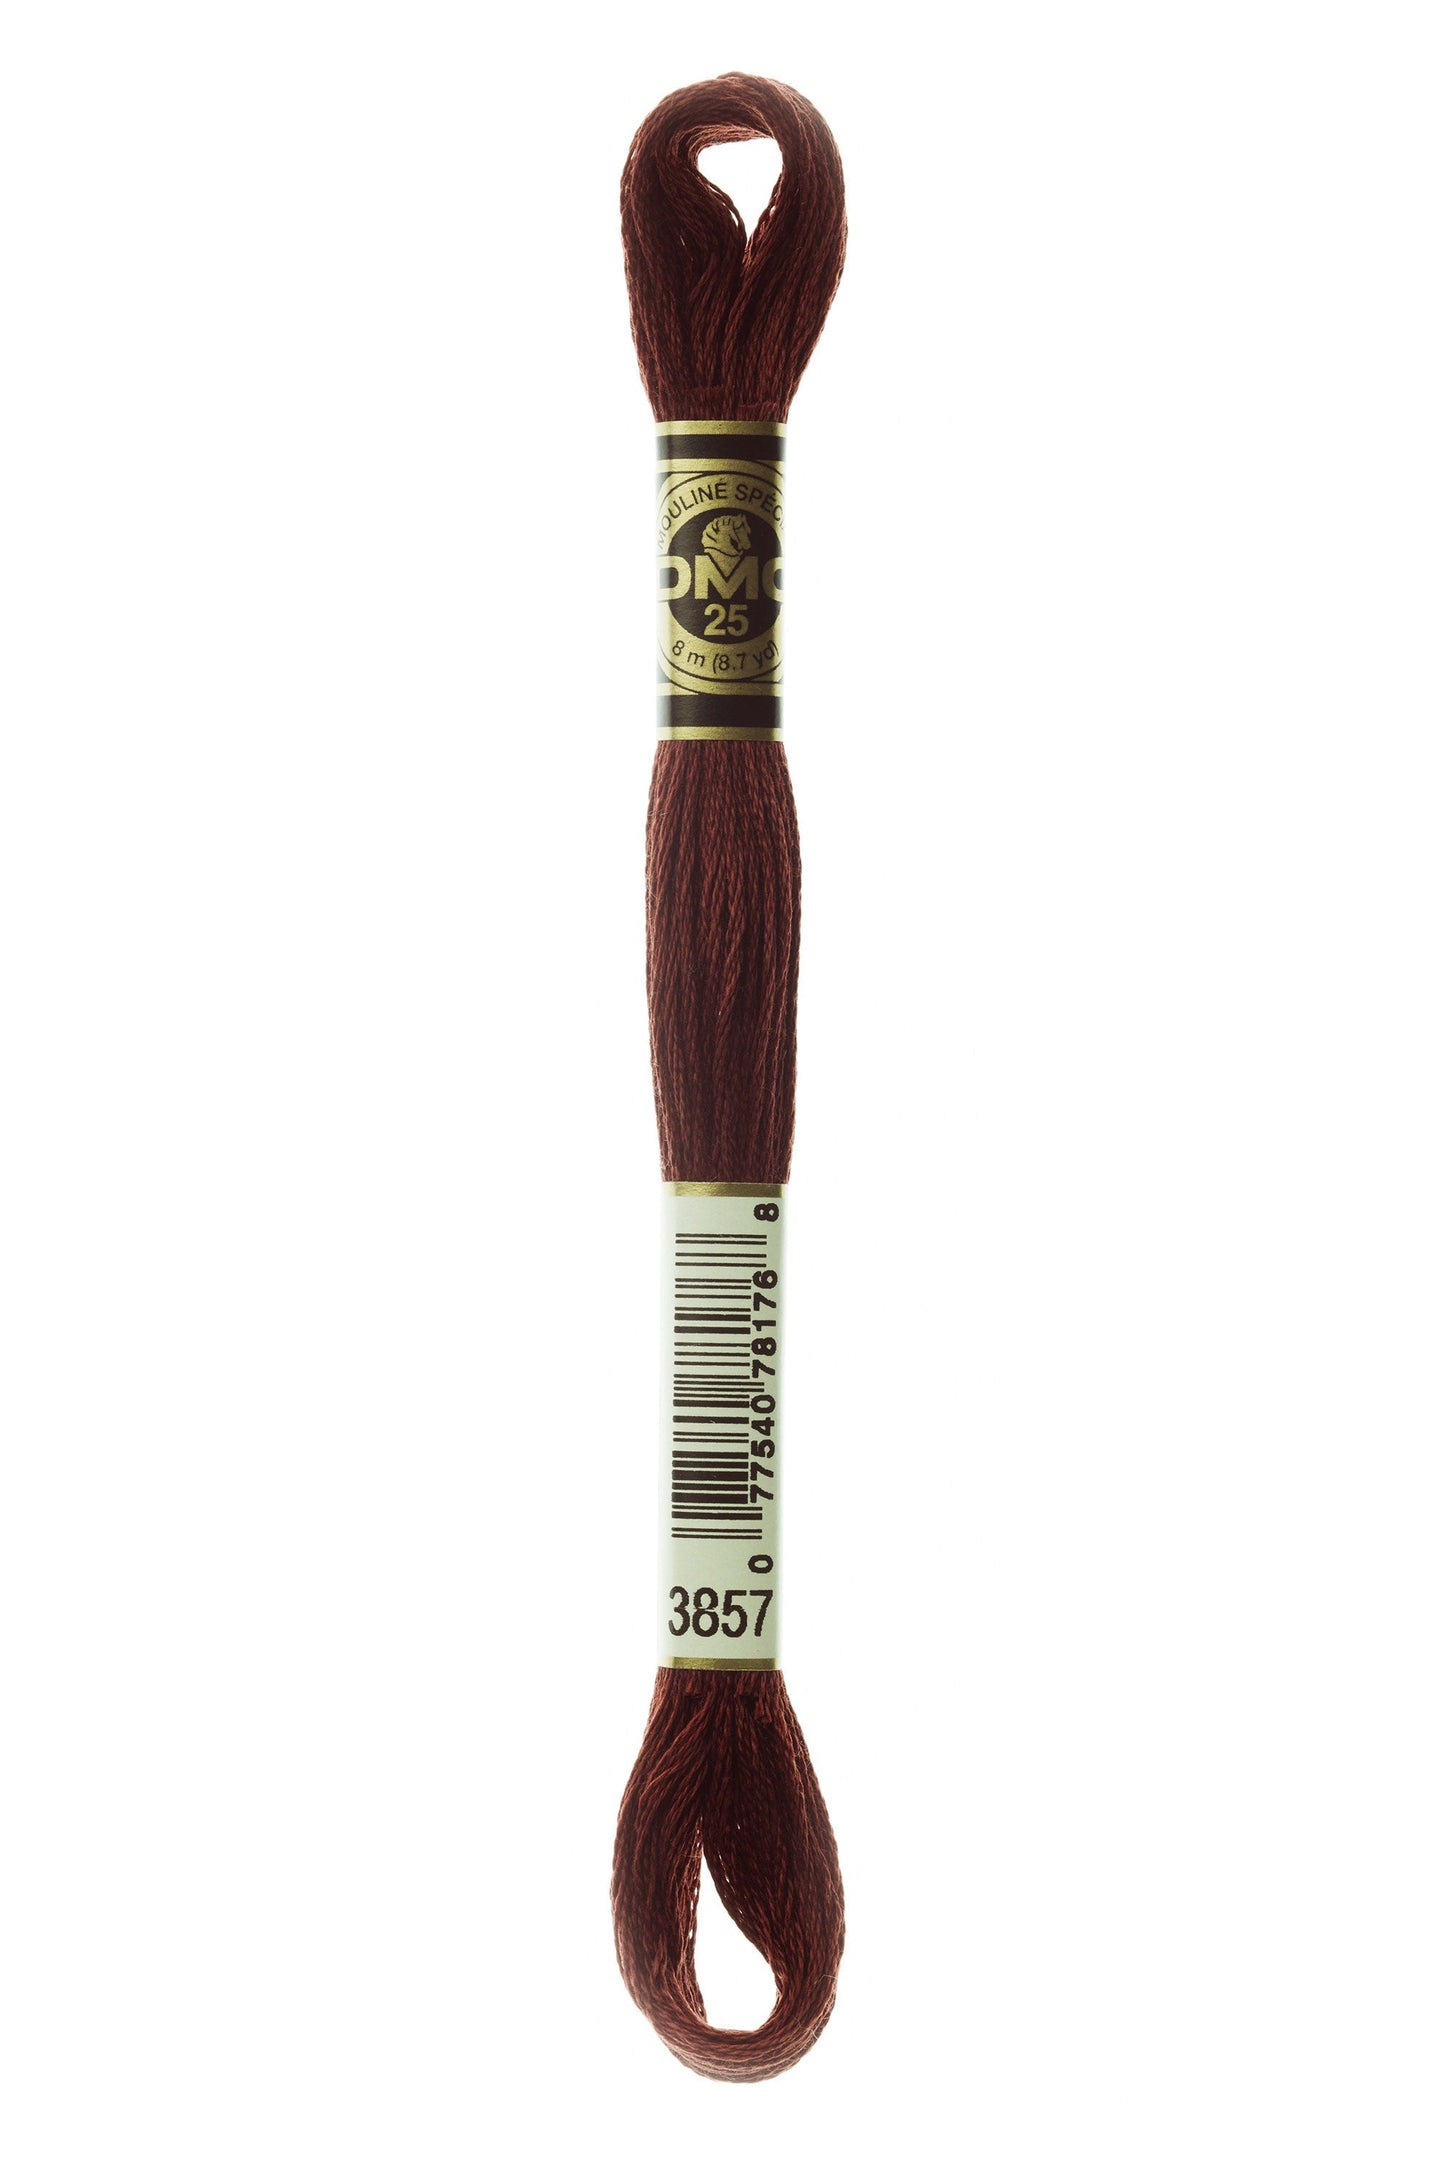 Six-Strand Embroidery Floss - 3857 (Oxblood)-Embroidery Thread-Wild and Woolly Yarns